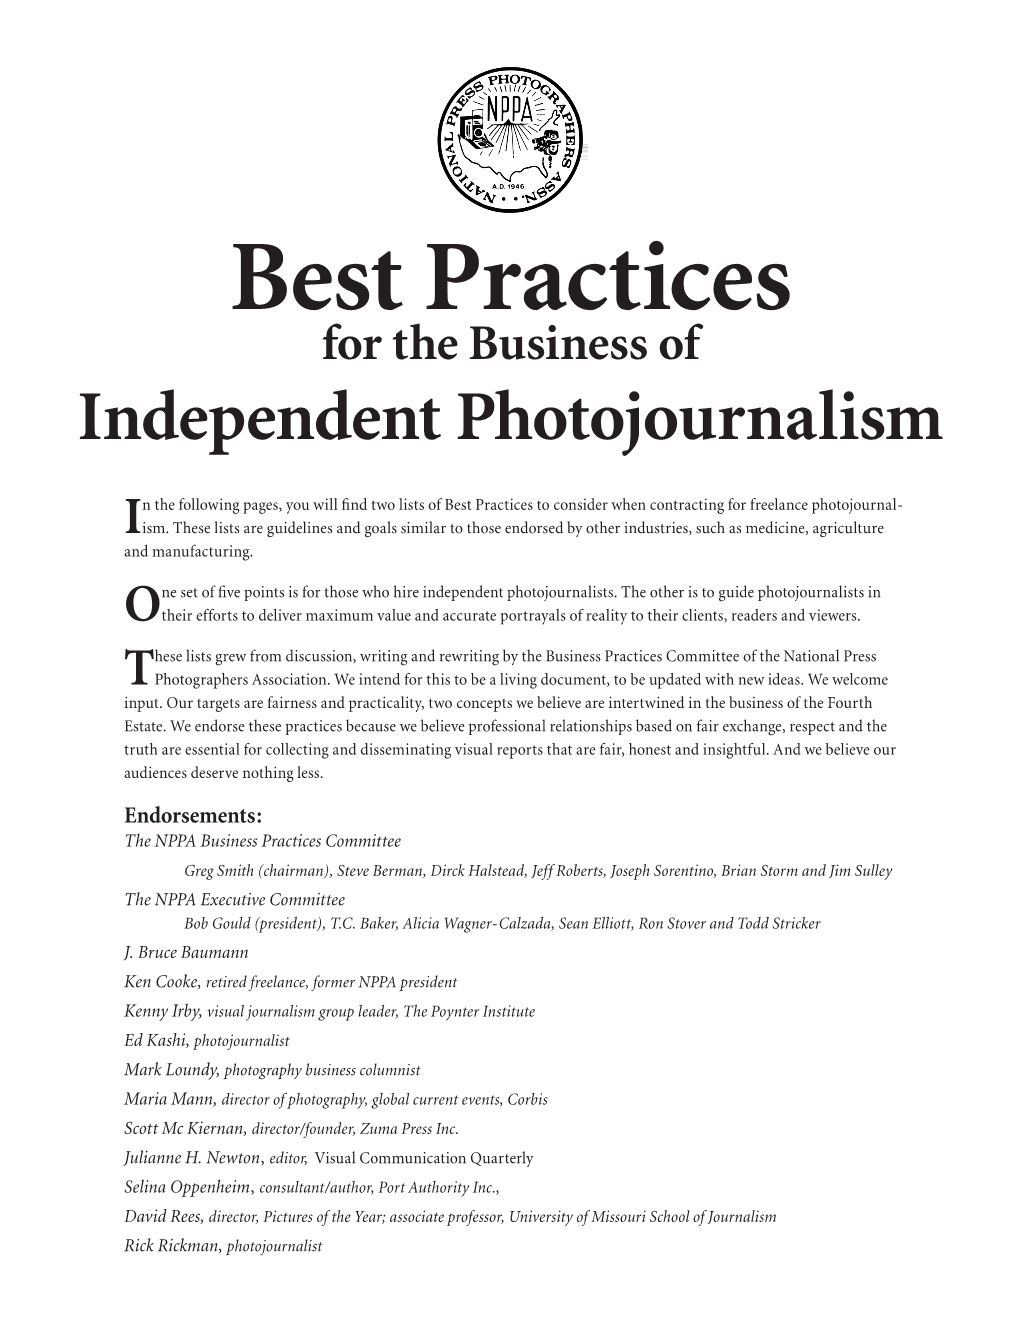 Best Practices for the Business of Independent Photojournalism